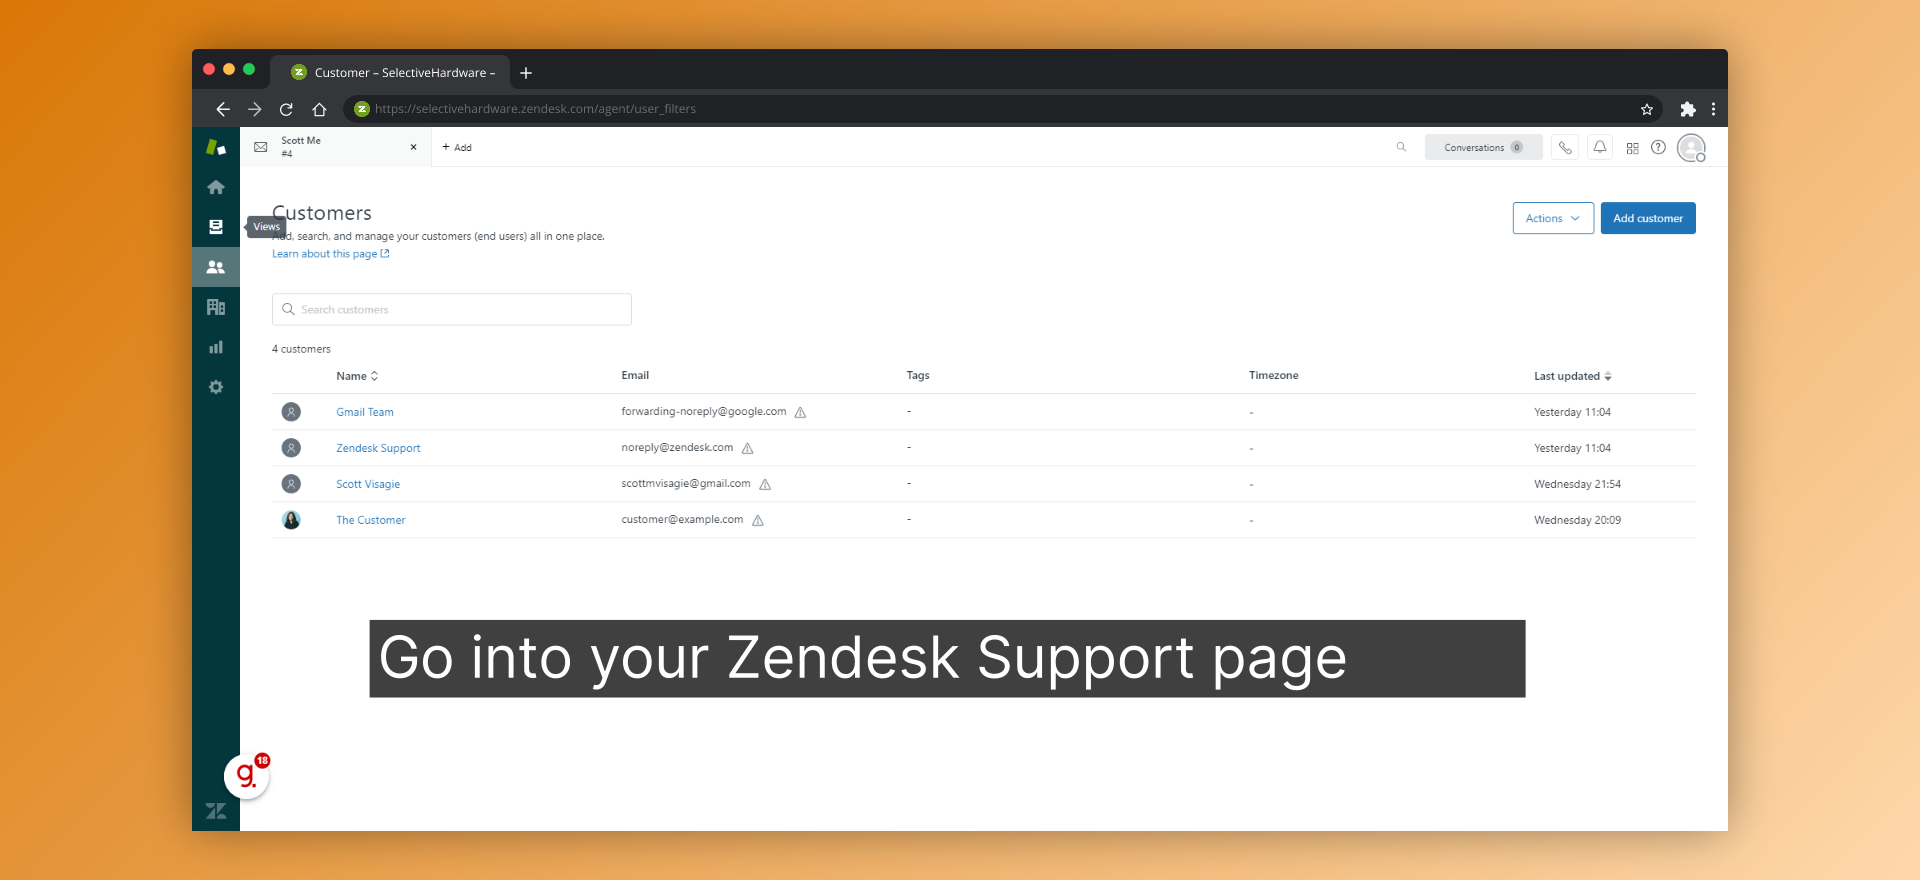 Go into your Zendesk Support page